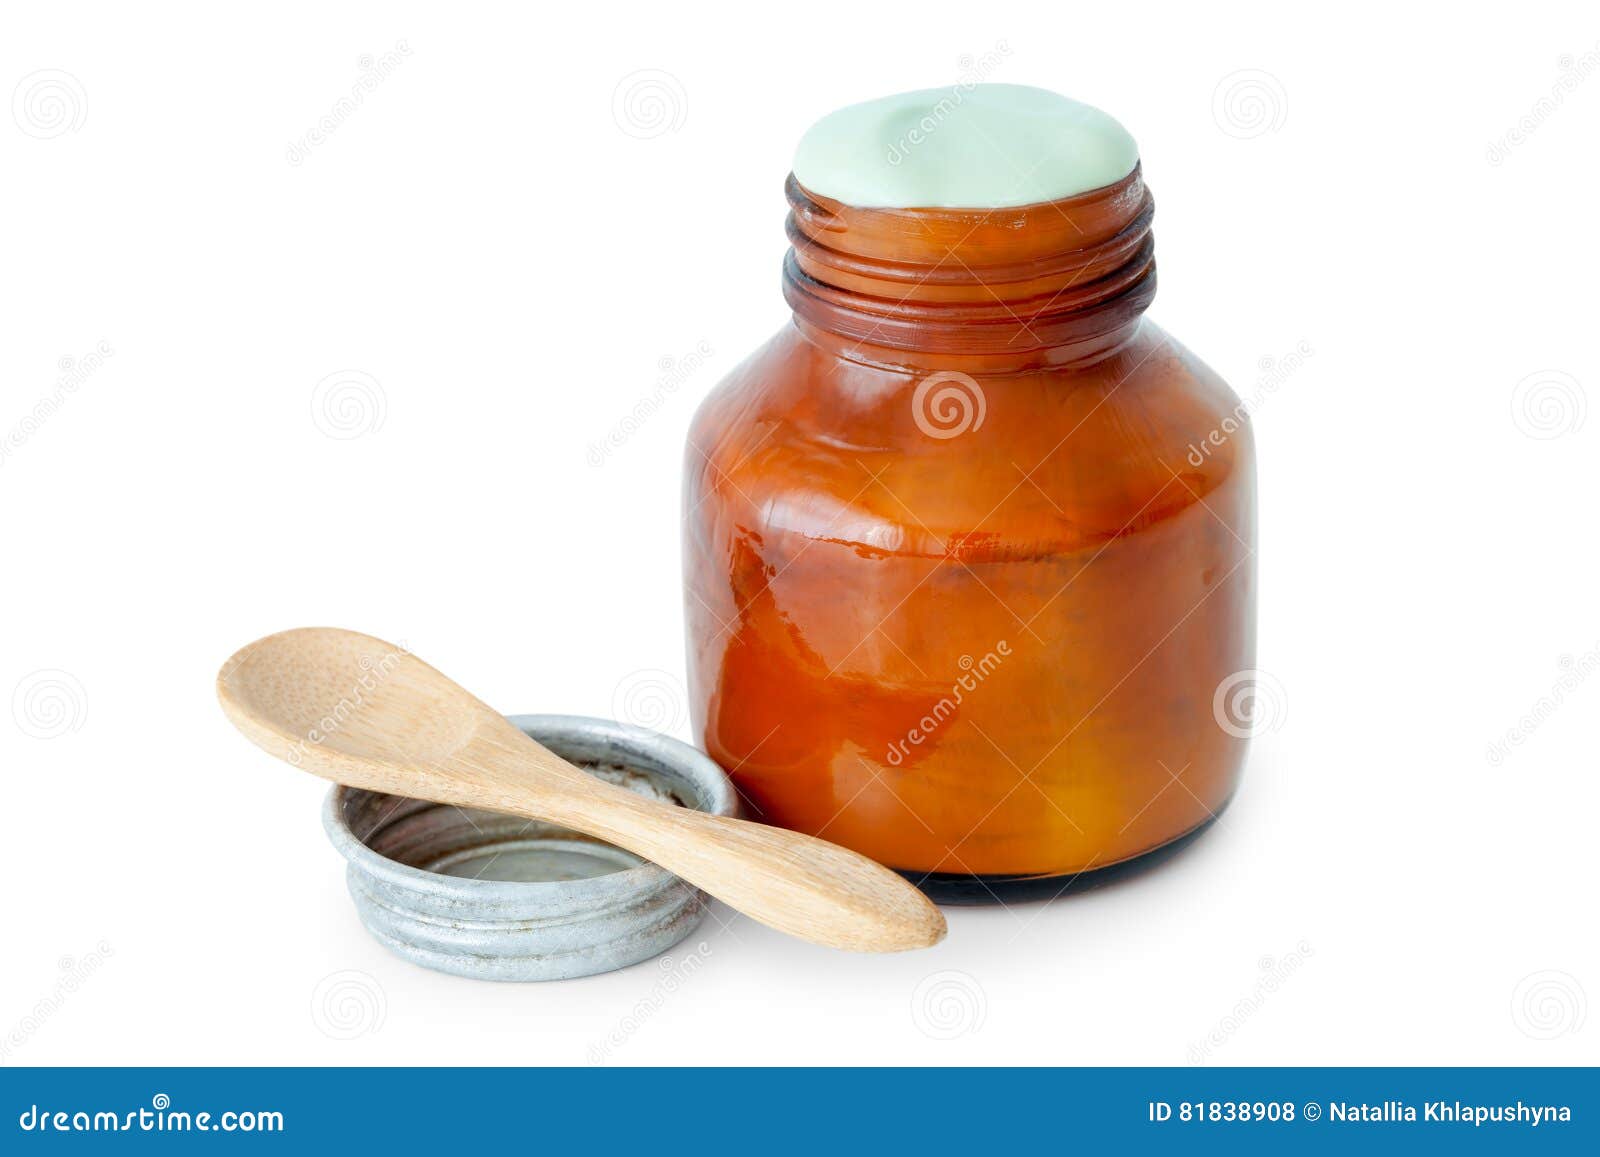 a balm jar full of medicated ointment and spoon.